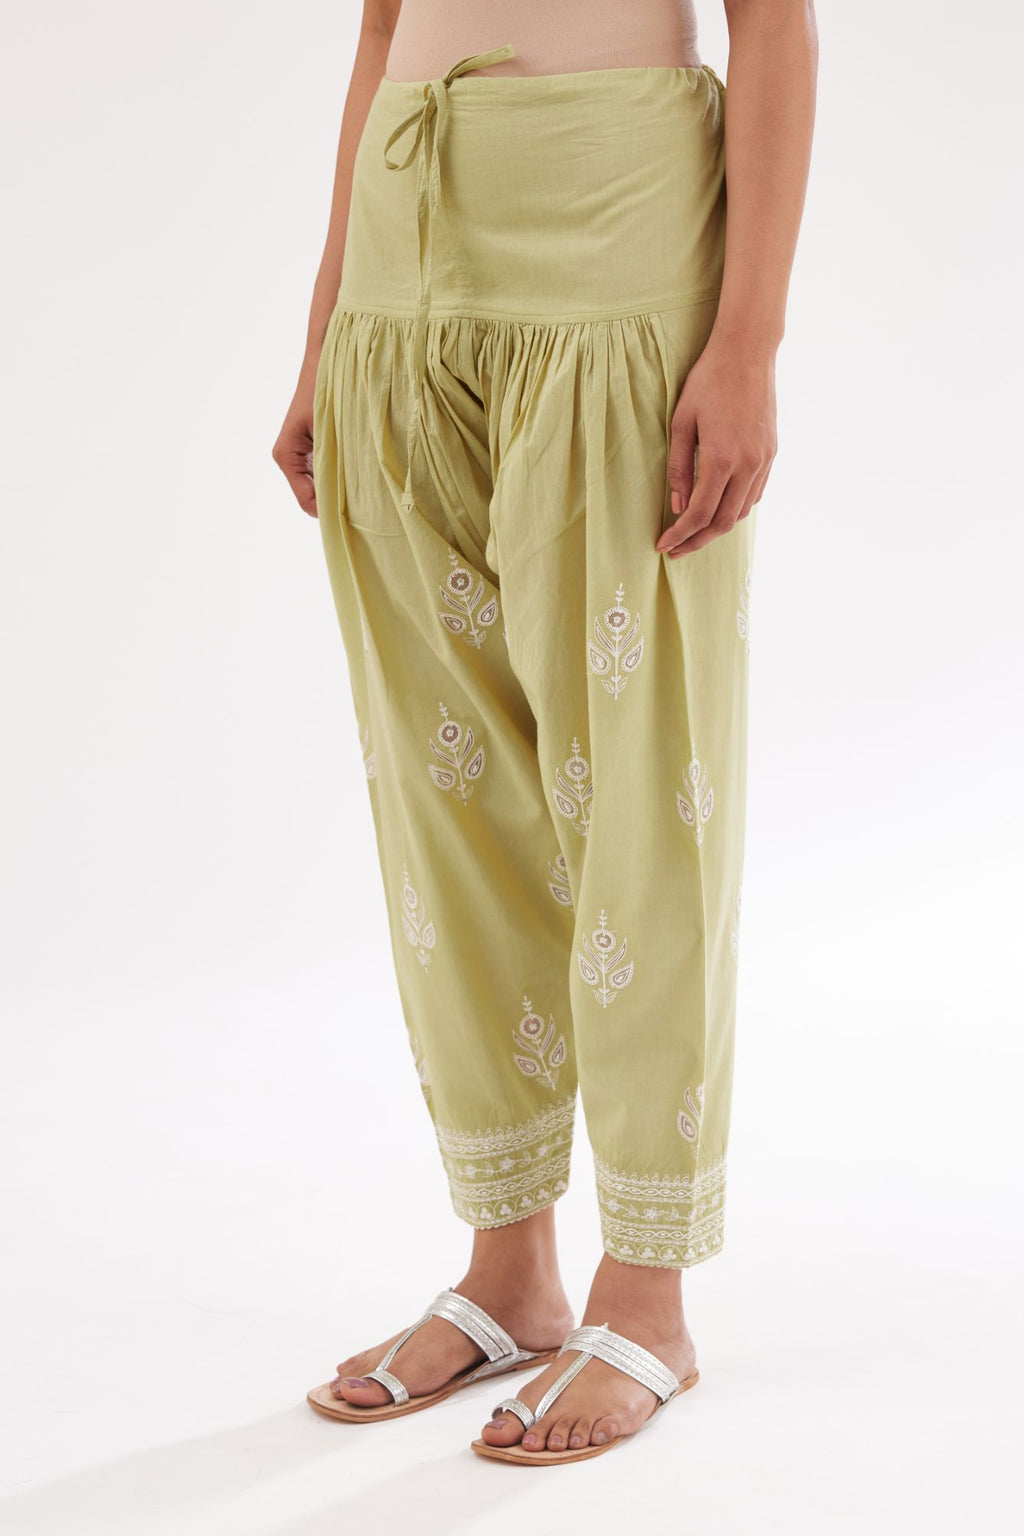 Green cotton narrow salwar with all-over dori and silk thread embroidery.